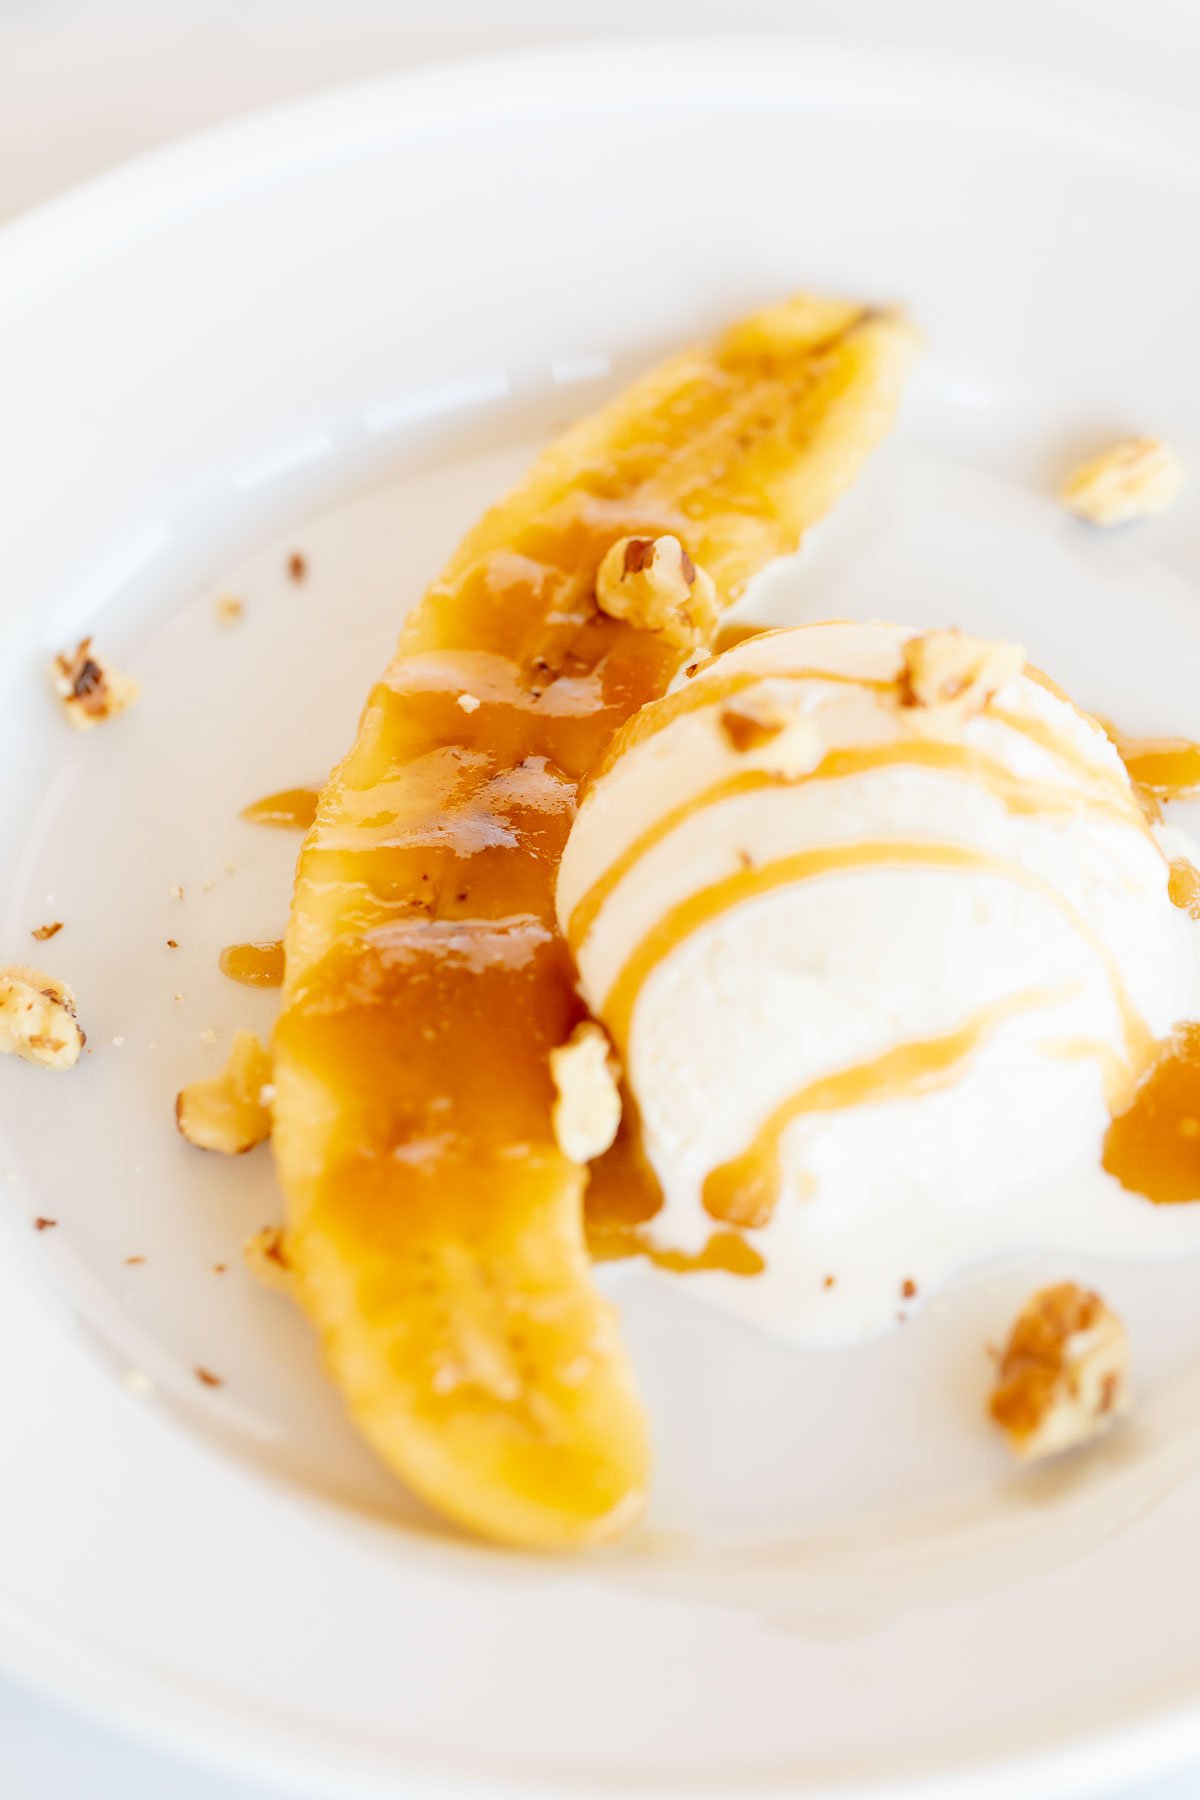 A delicious white plate adorned with ice cream topped off by a tantalizing banana slice.